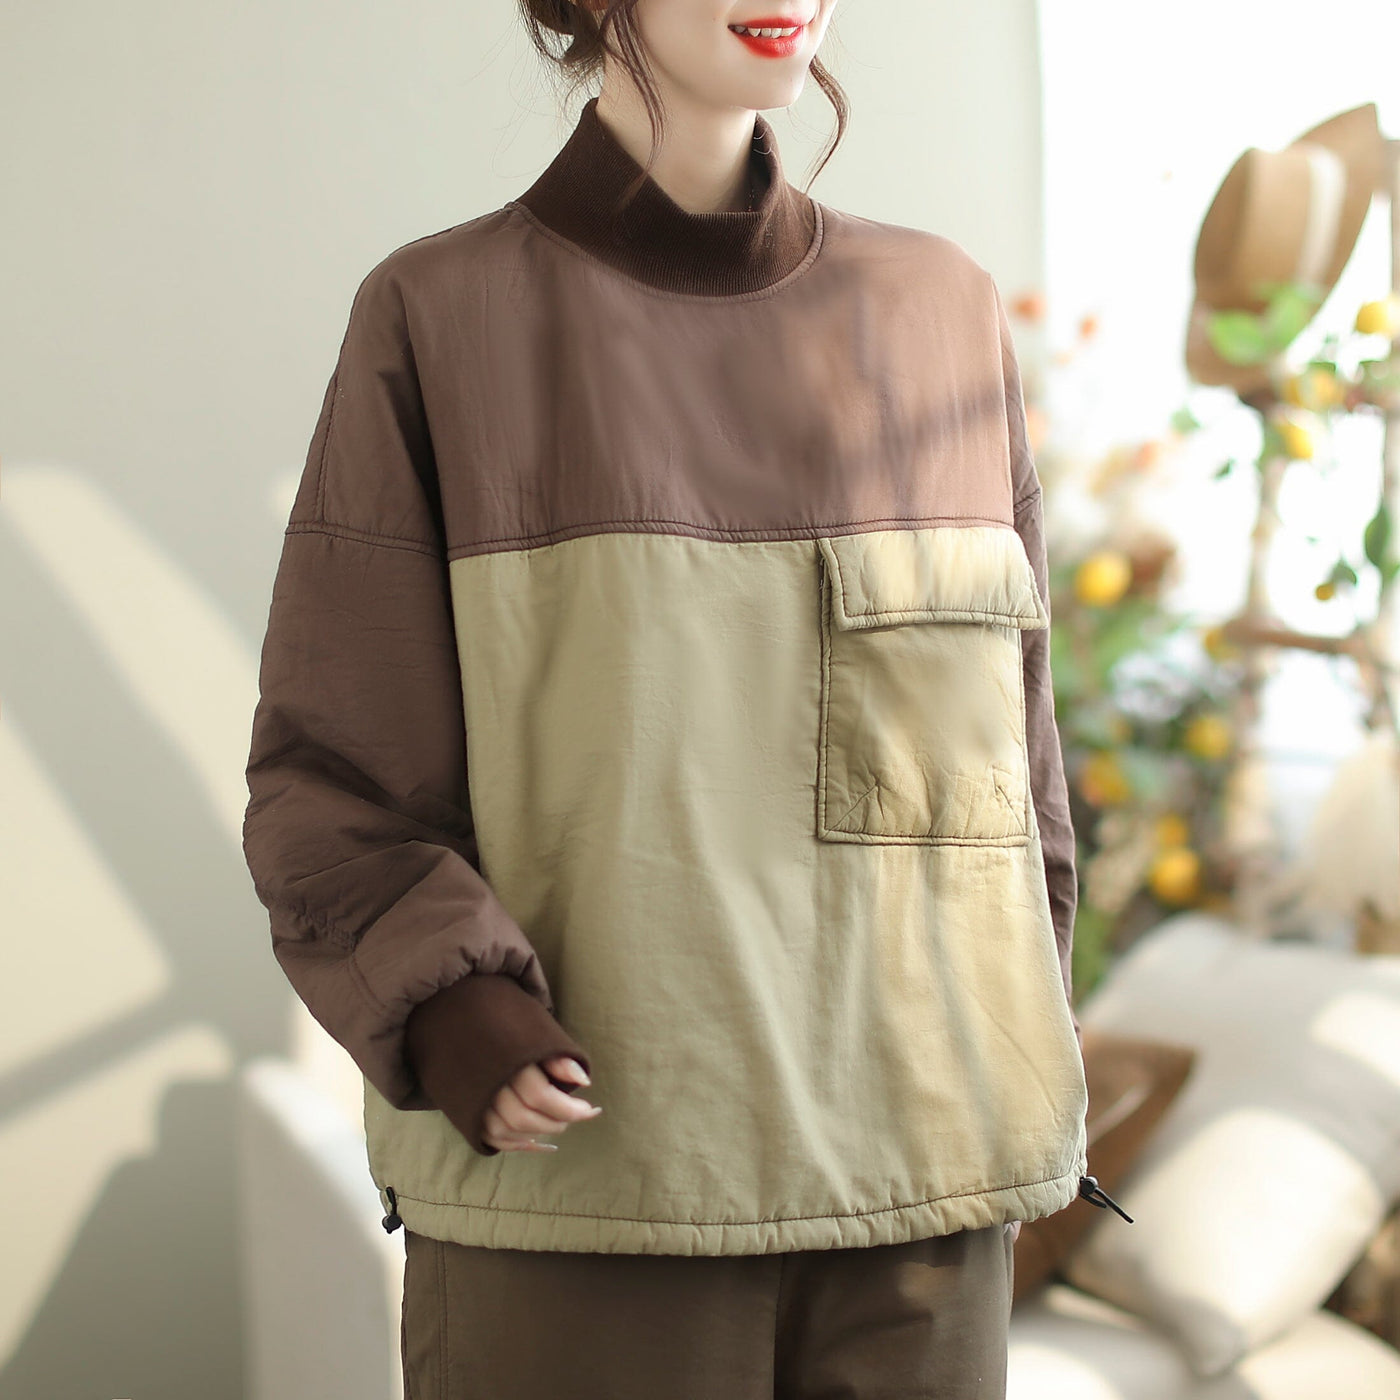 Winter Minimalist Casual Quilted Pull Over Coat